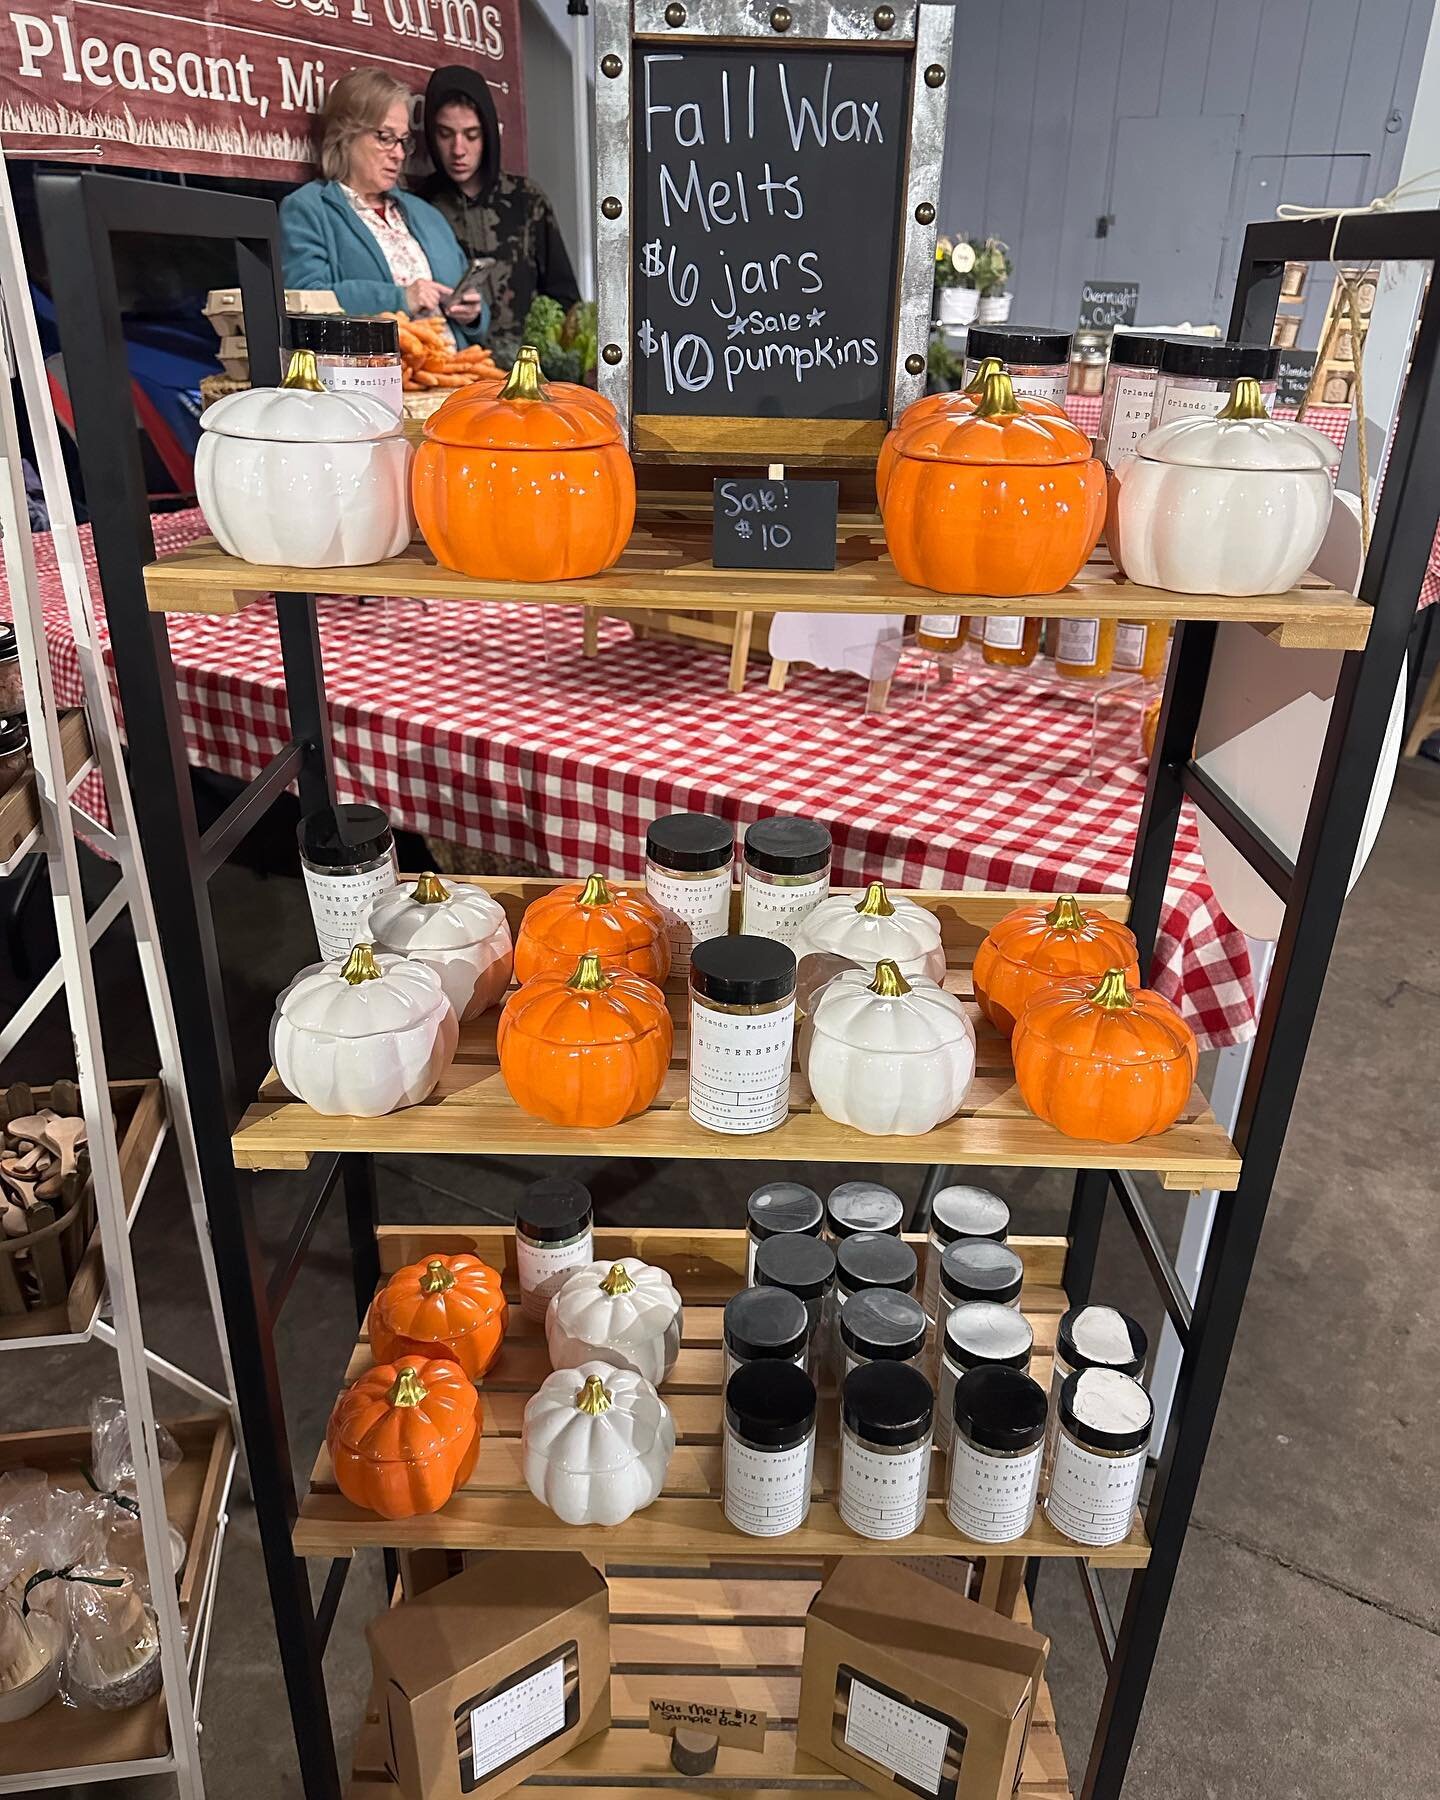 Our Pumpkin wax melt jars are on sale for $10 today, you get an ounce more of wax melts and cute jar once they&rsquo;re gone! We also have a few fall soaps left, once they are gone that&rsquo;s it! Come shop the market today under the pavilion where 